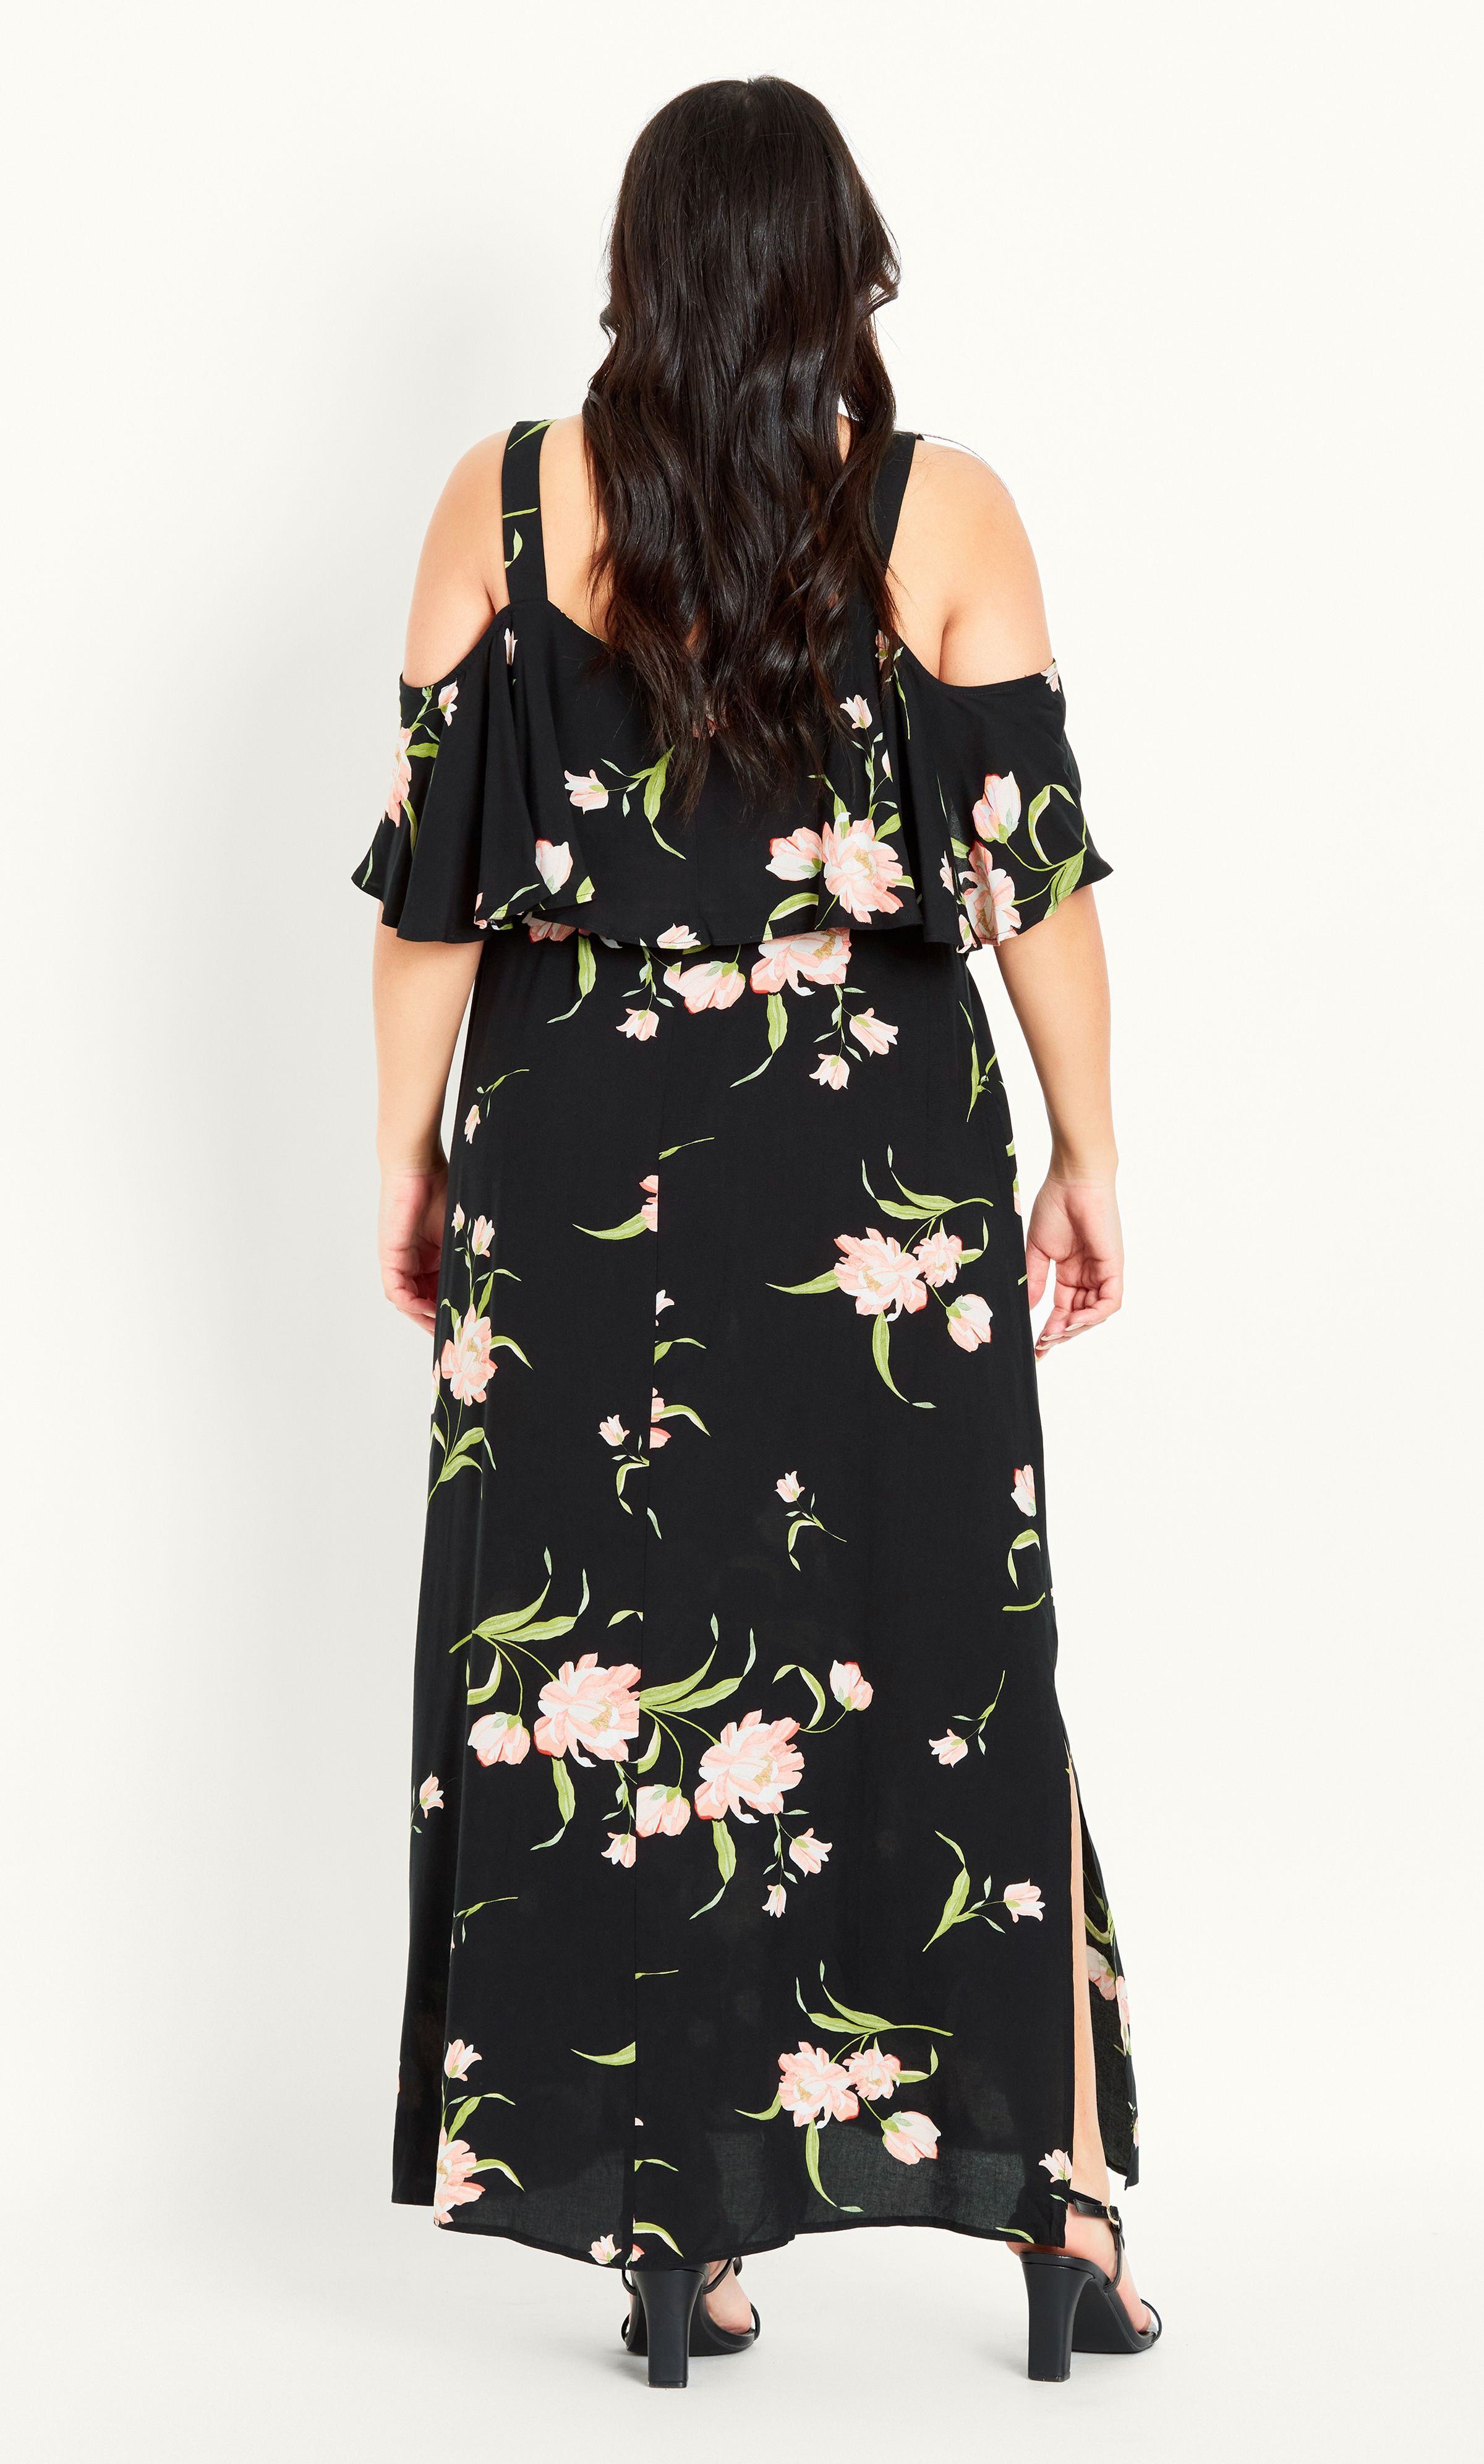 Look dreamy and feminine in our Floral Overlay Dress, offering a beautifully draped maxi hemline that floats ever so elegantly in motion. Complete with a trendy cold shoulder design, this summer dress has us dreaming of sun-soaked days ahead! Key Features Include: - V-neckline - Cold shoulder design - Elbow-length ruffle sleeve coverage - Removable self-tie waist belt - Lightweight non-stretch fabrication - Relaxed fit - Pull over style - Unlined - Maxi length - Side splits to hemline For an elevated finish, team with tassel earrings, matching heels and a bold lip.